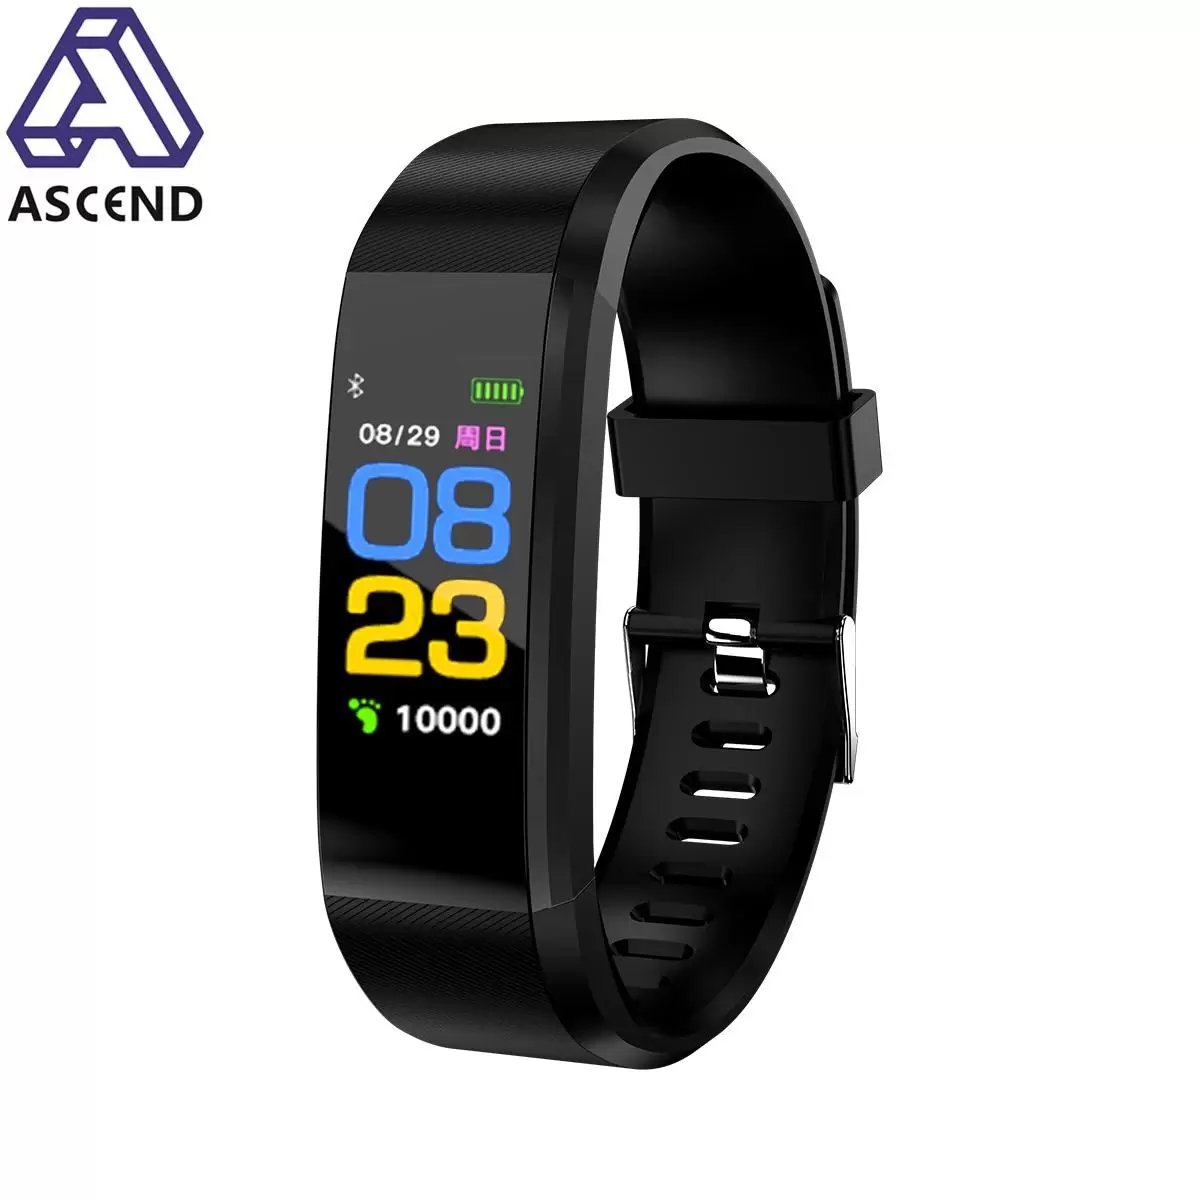 What is ActiV8 Fitness Tracker